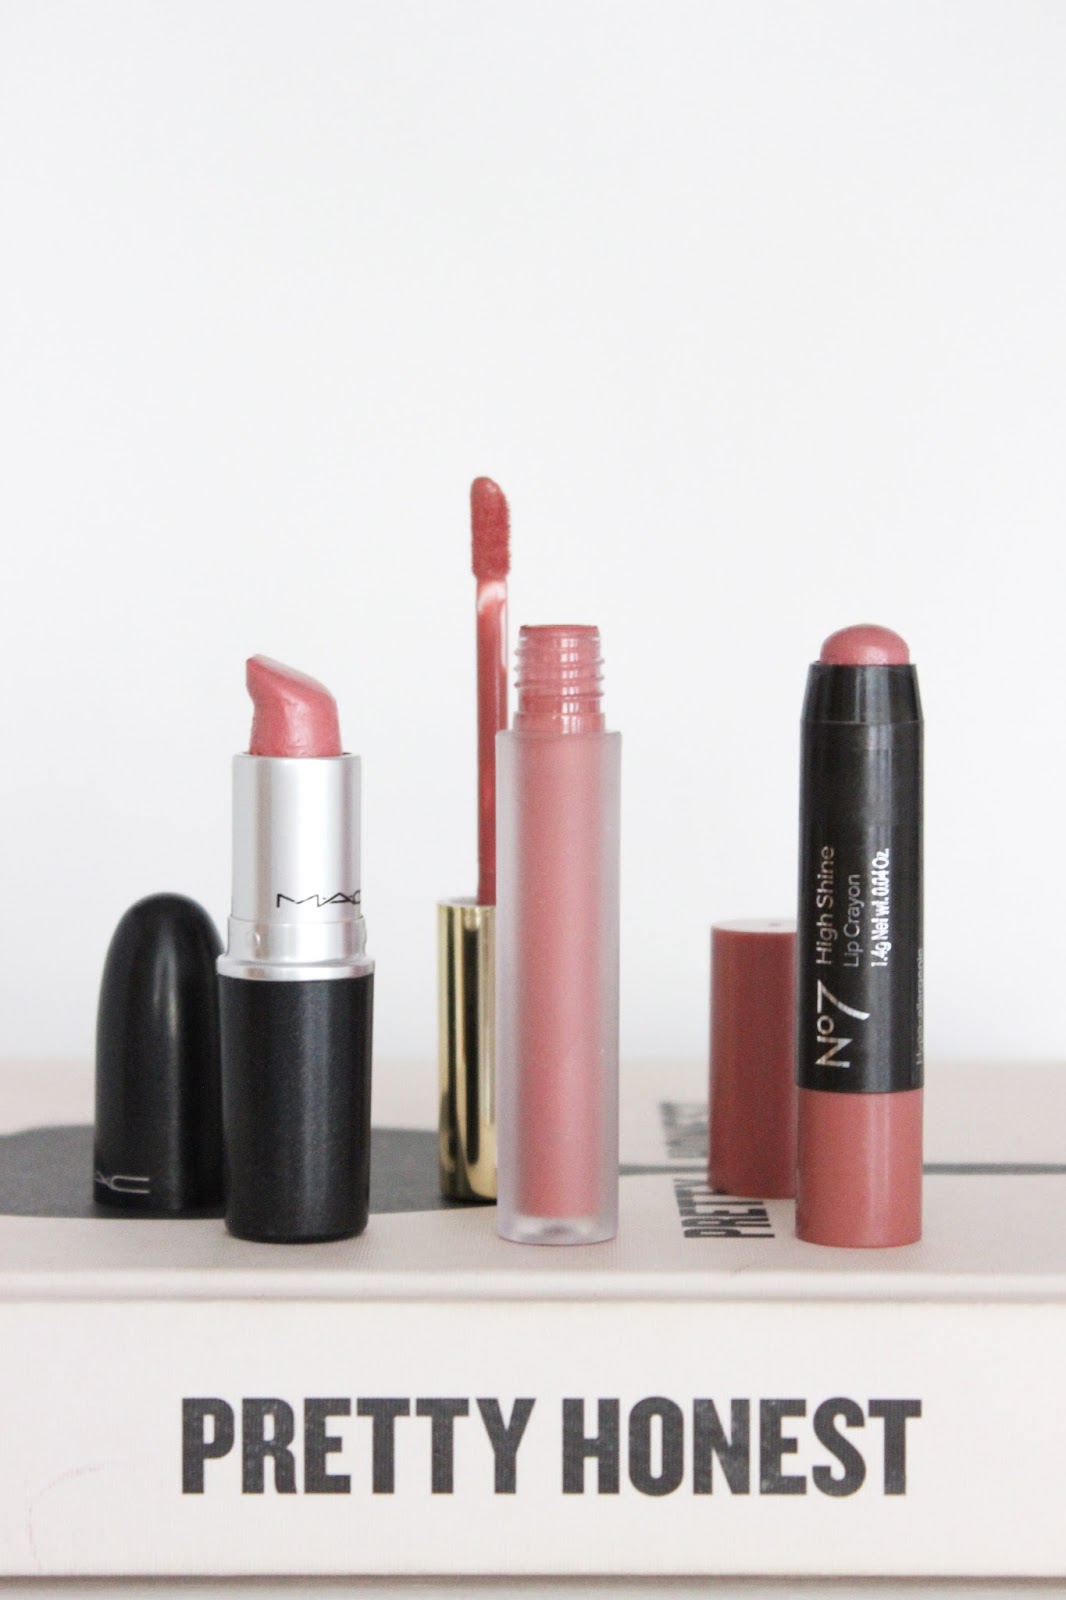 Top 3 Nude Lip Products